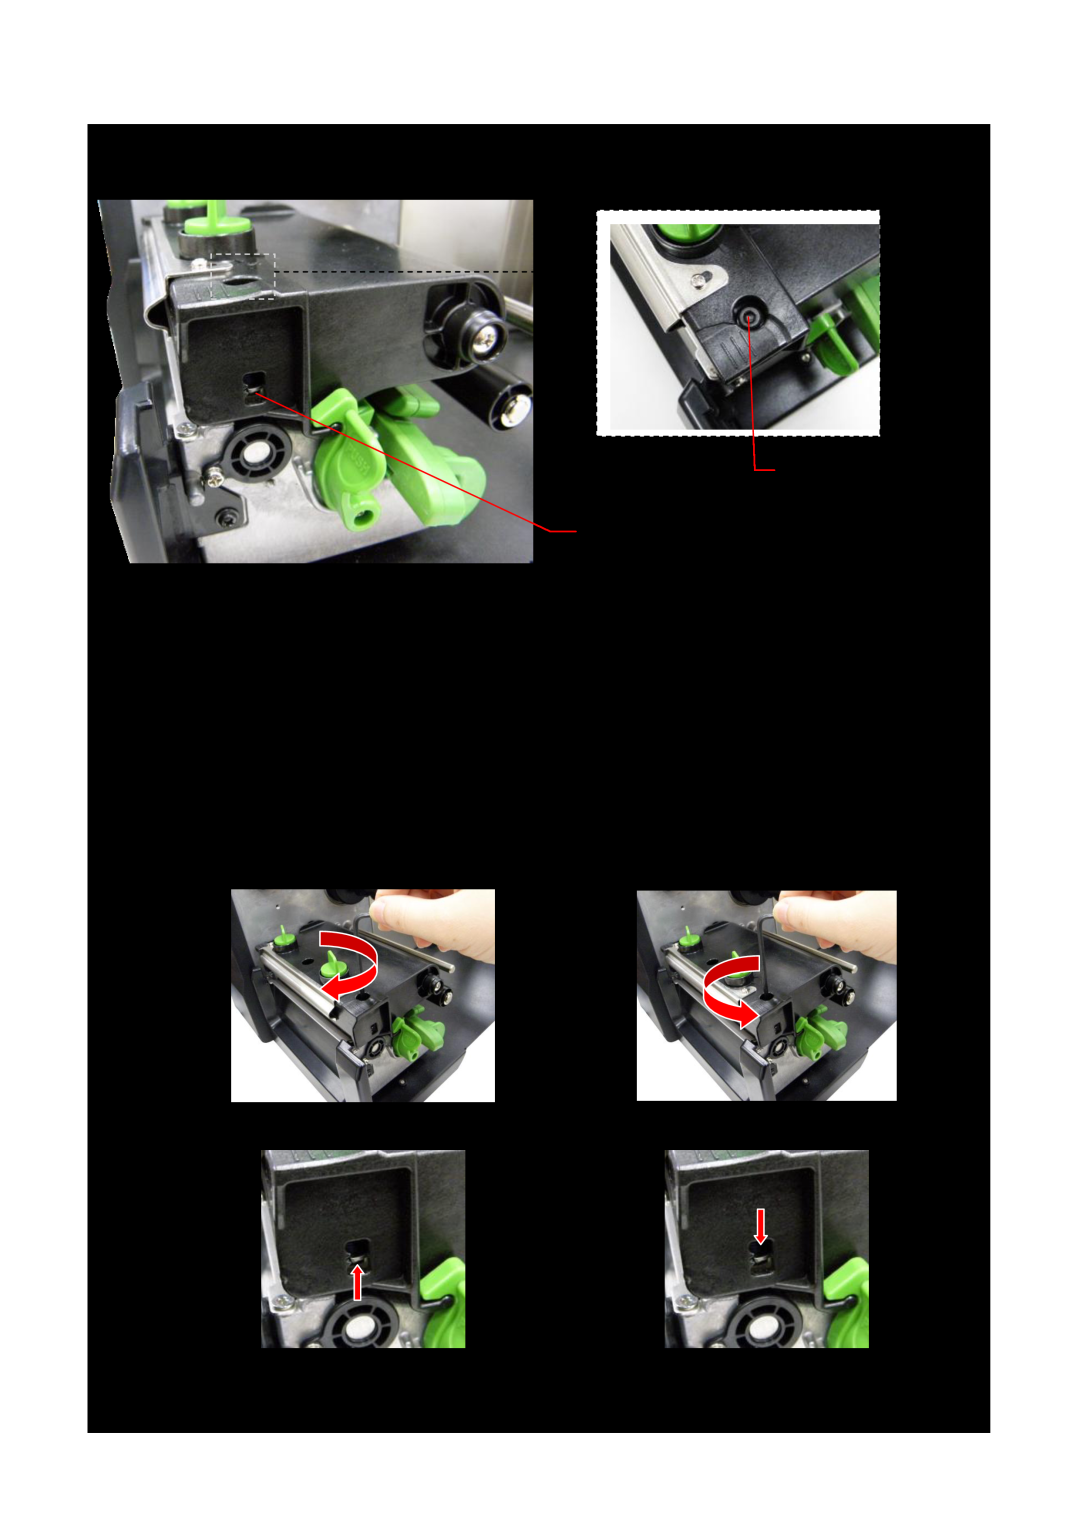 The Speaker Company me240 manual Z-axis Mechanism Adjustment Knob, Z-axis mechanism adjustment knob Marker position 